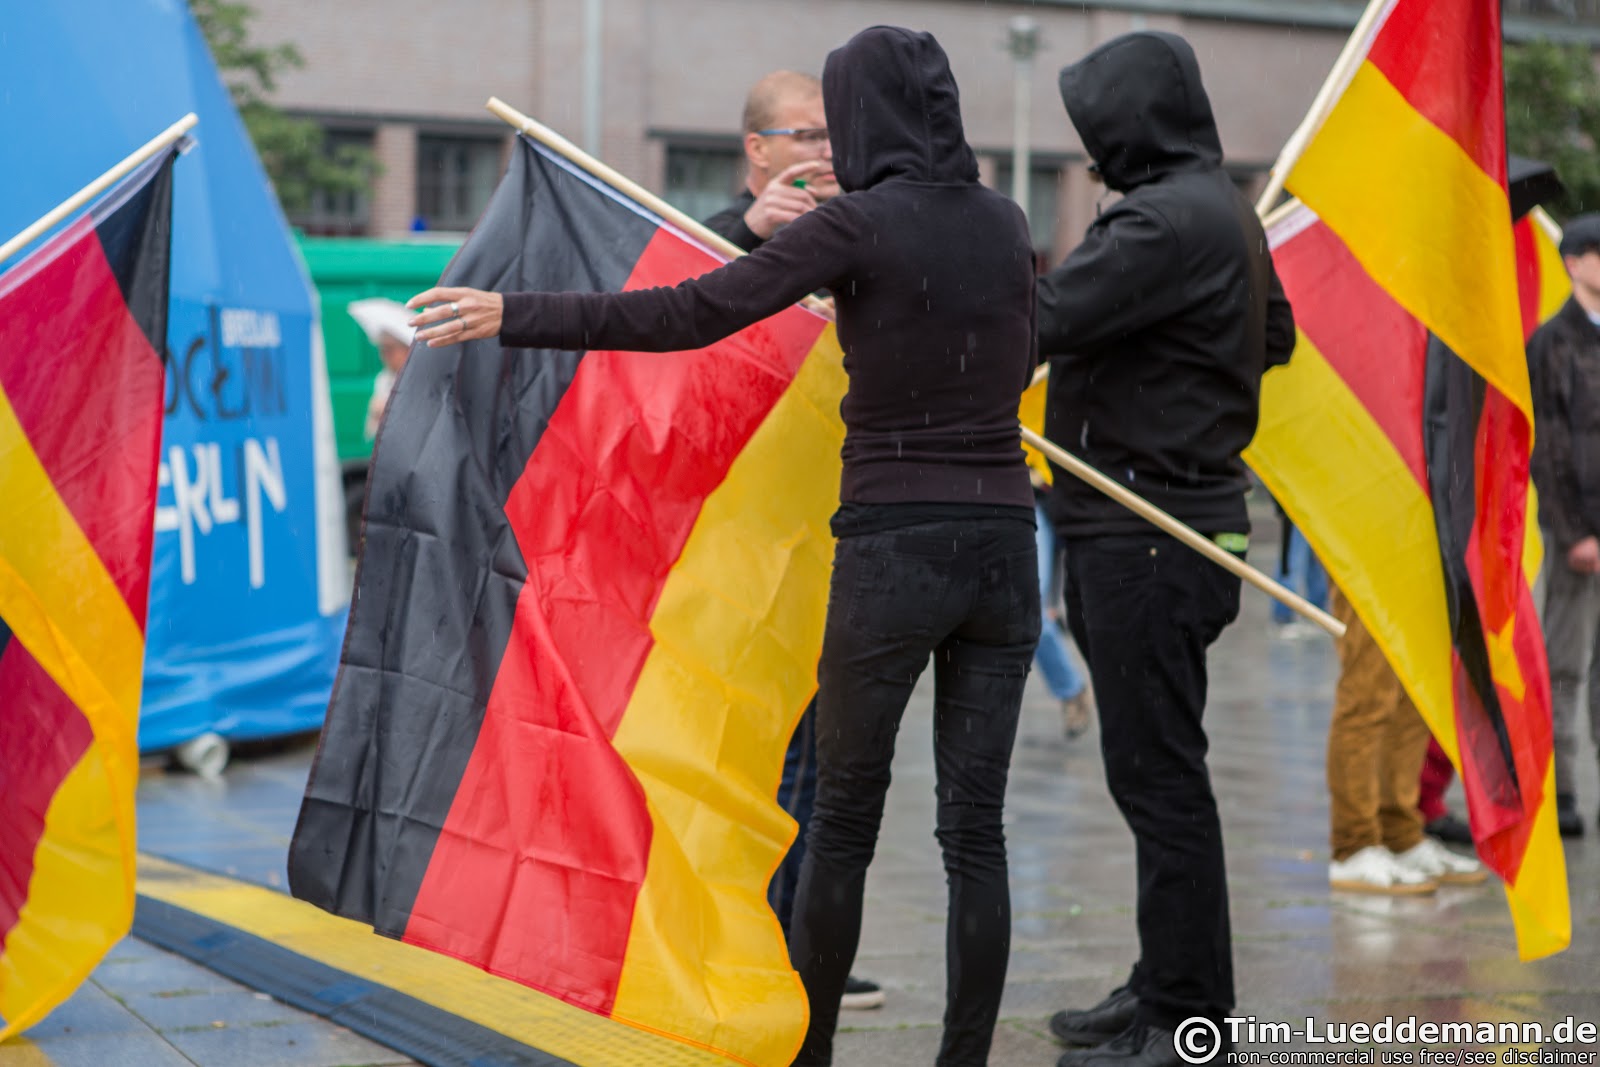 Taking life in the name of ideology: Germany’s right-wing network